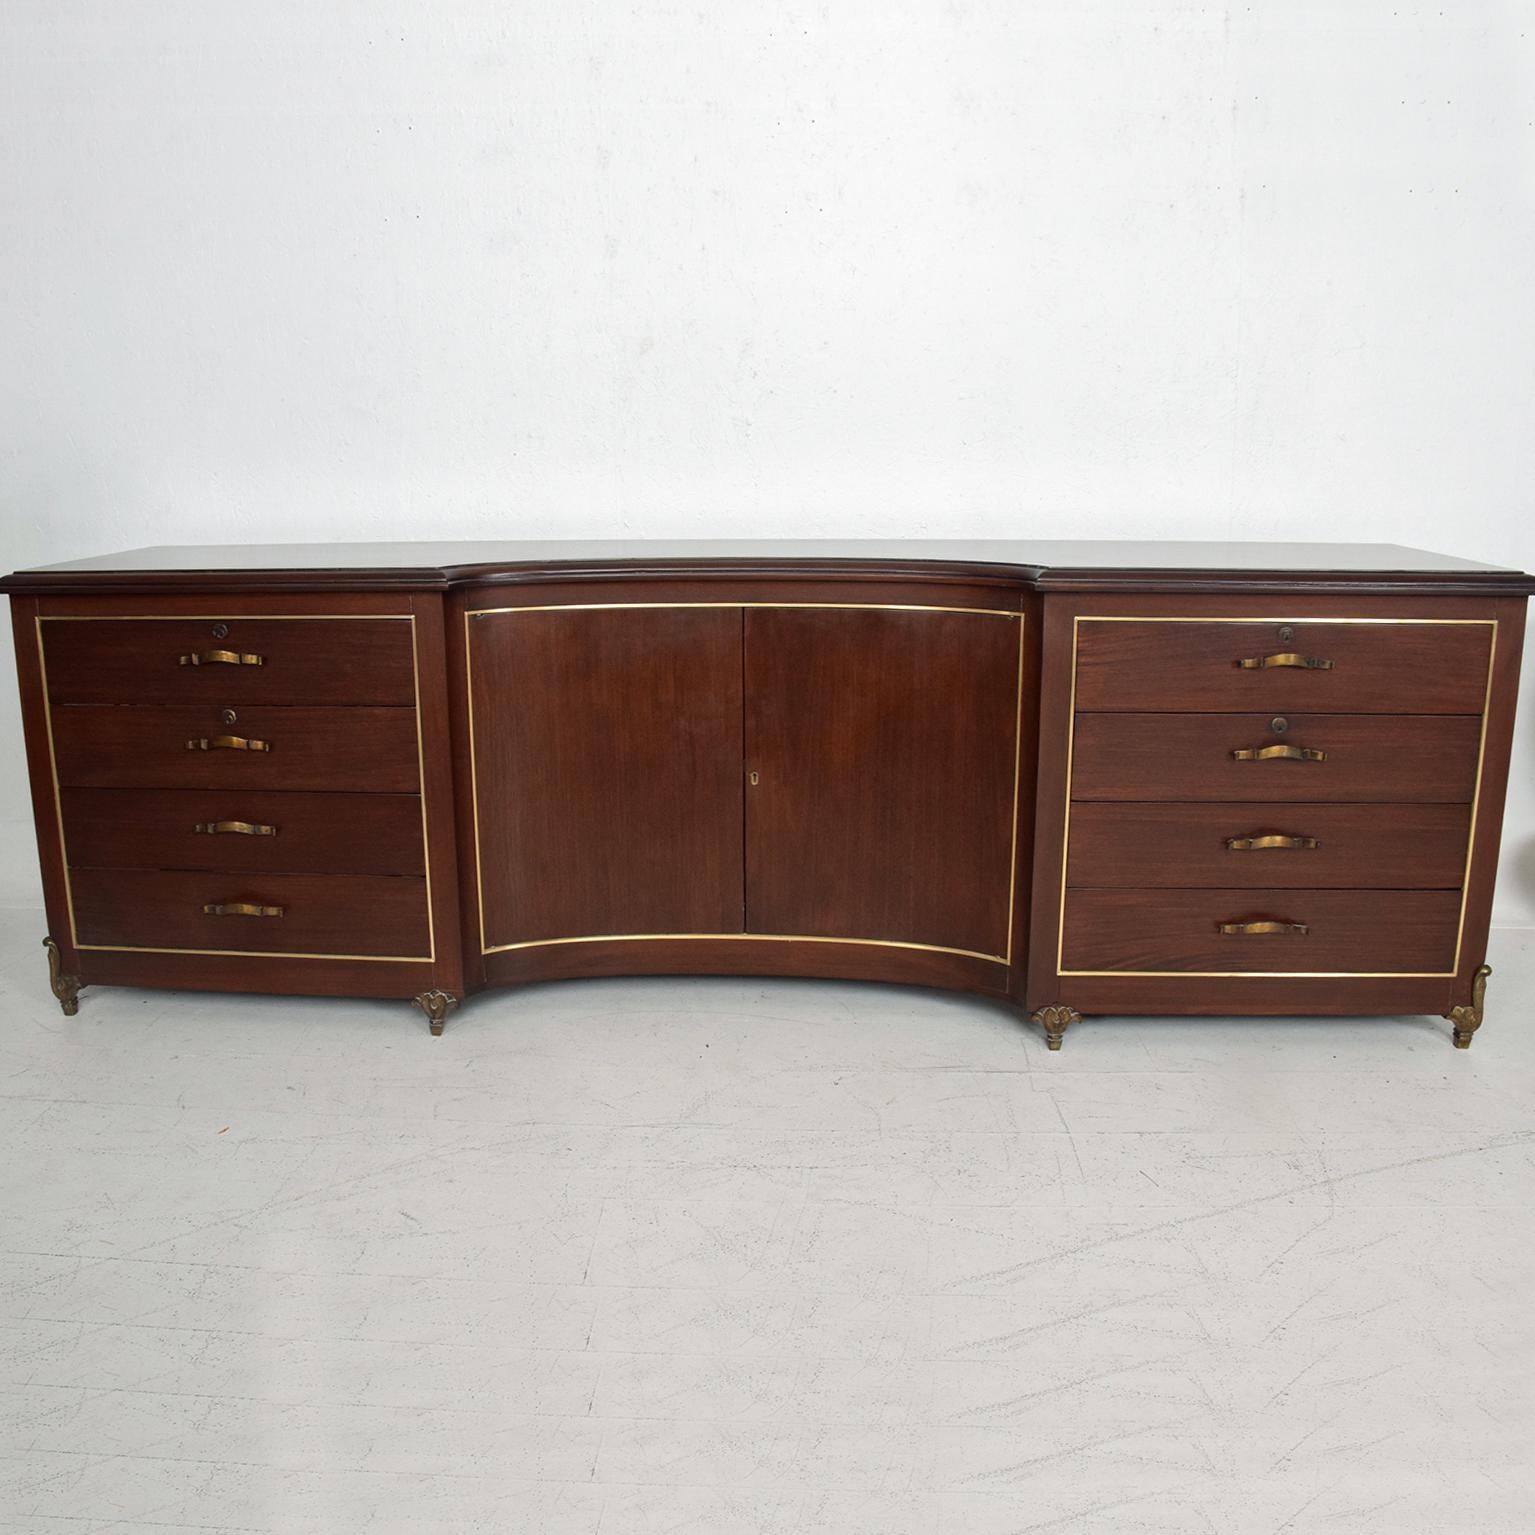 Midcentury Modernist credenza dresser in mahogany and bronze attributed to Arturo Pani, Mexico, circa 1950s.


No markings or signature from the maker.

Magnificent design with curved center and angled doors - pull-out drawers at each side.